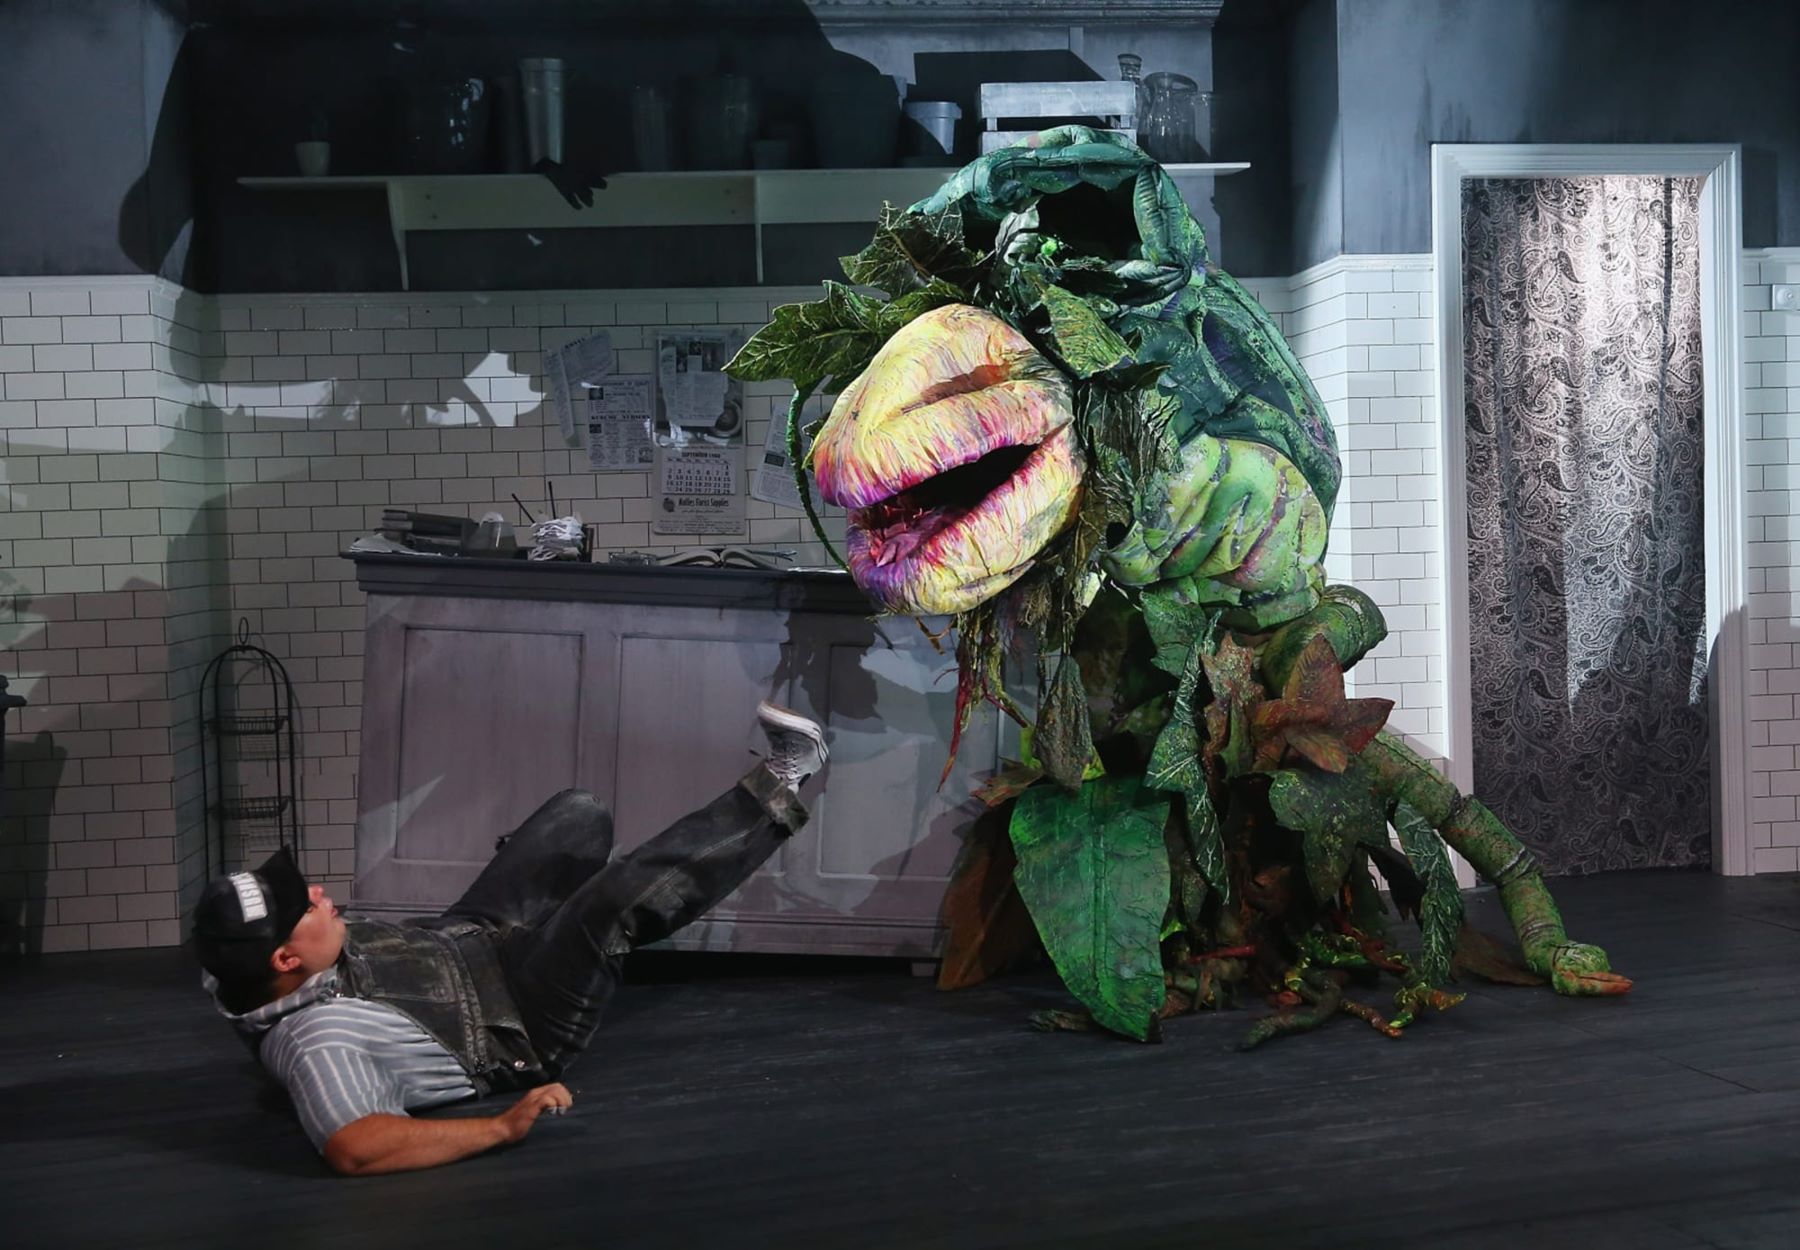 How To Watch Little Shop Of Horrors